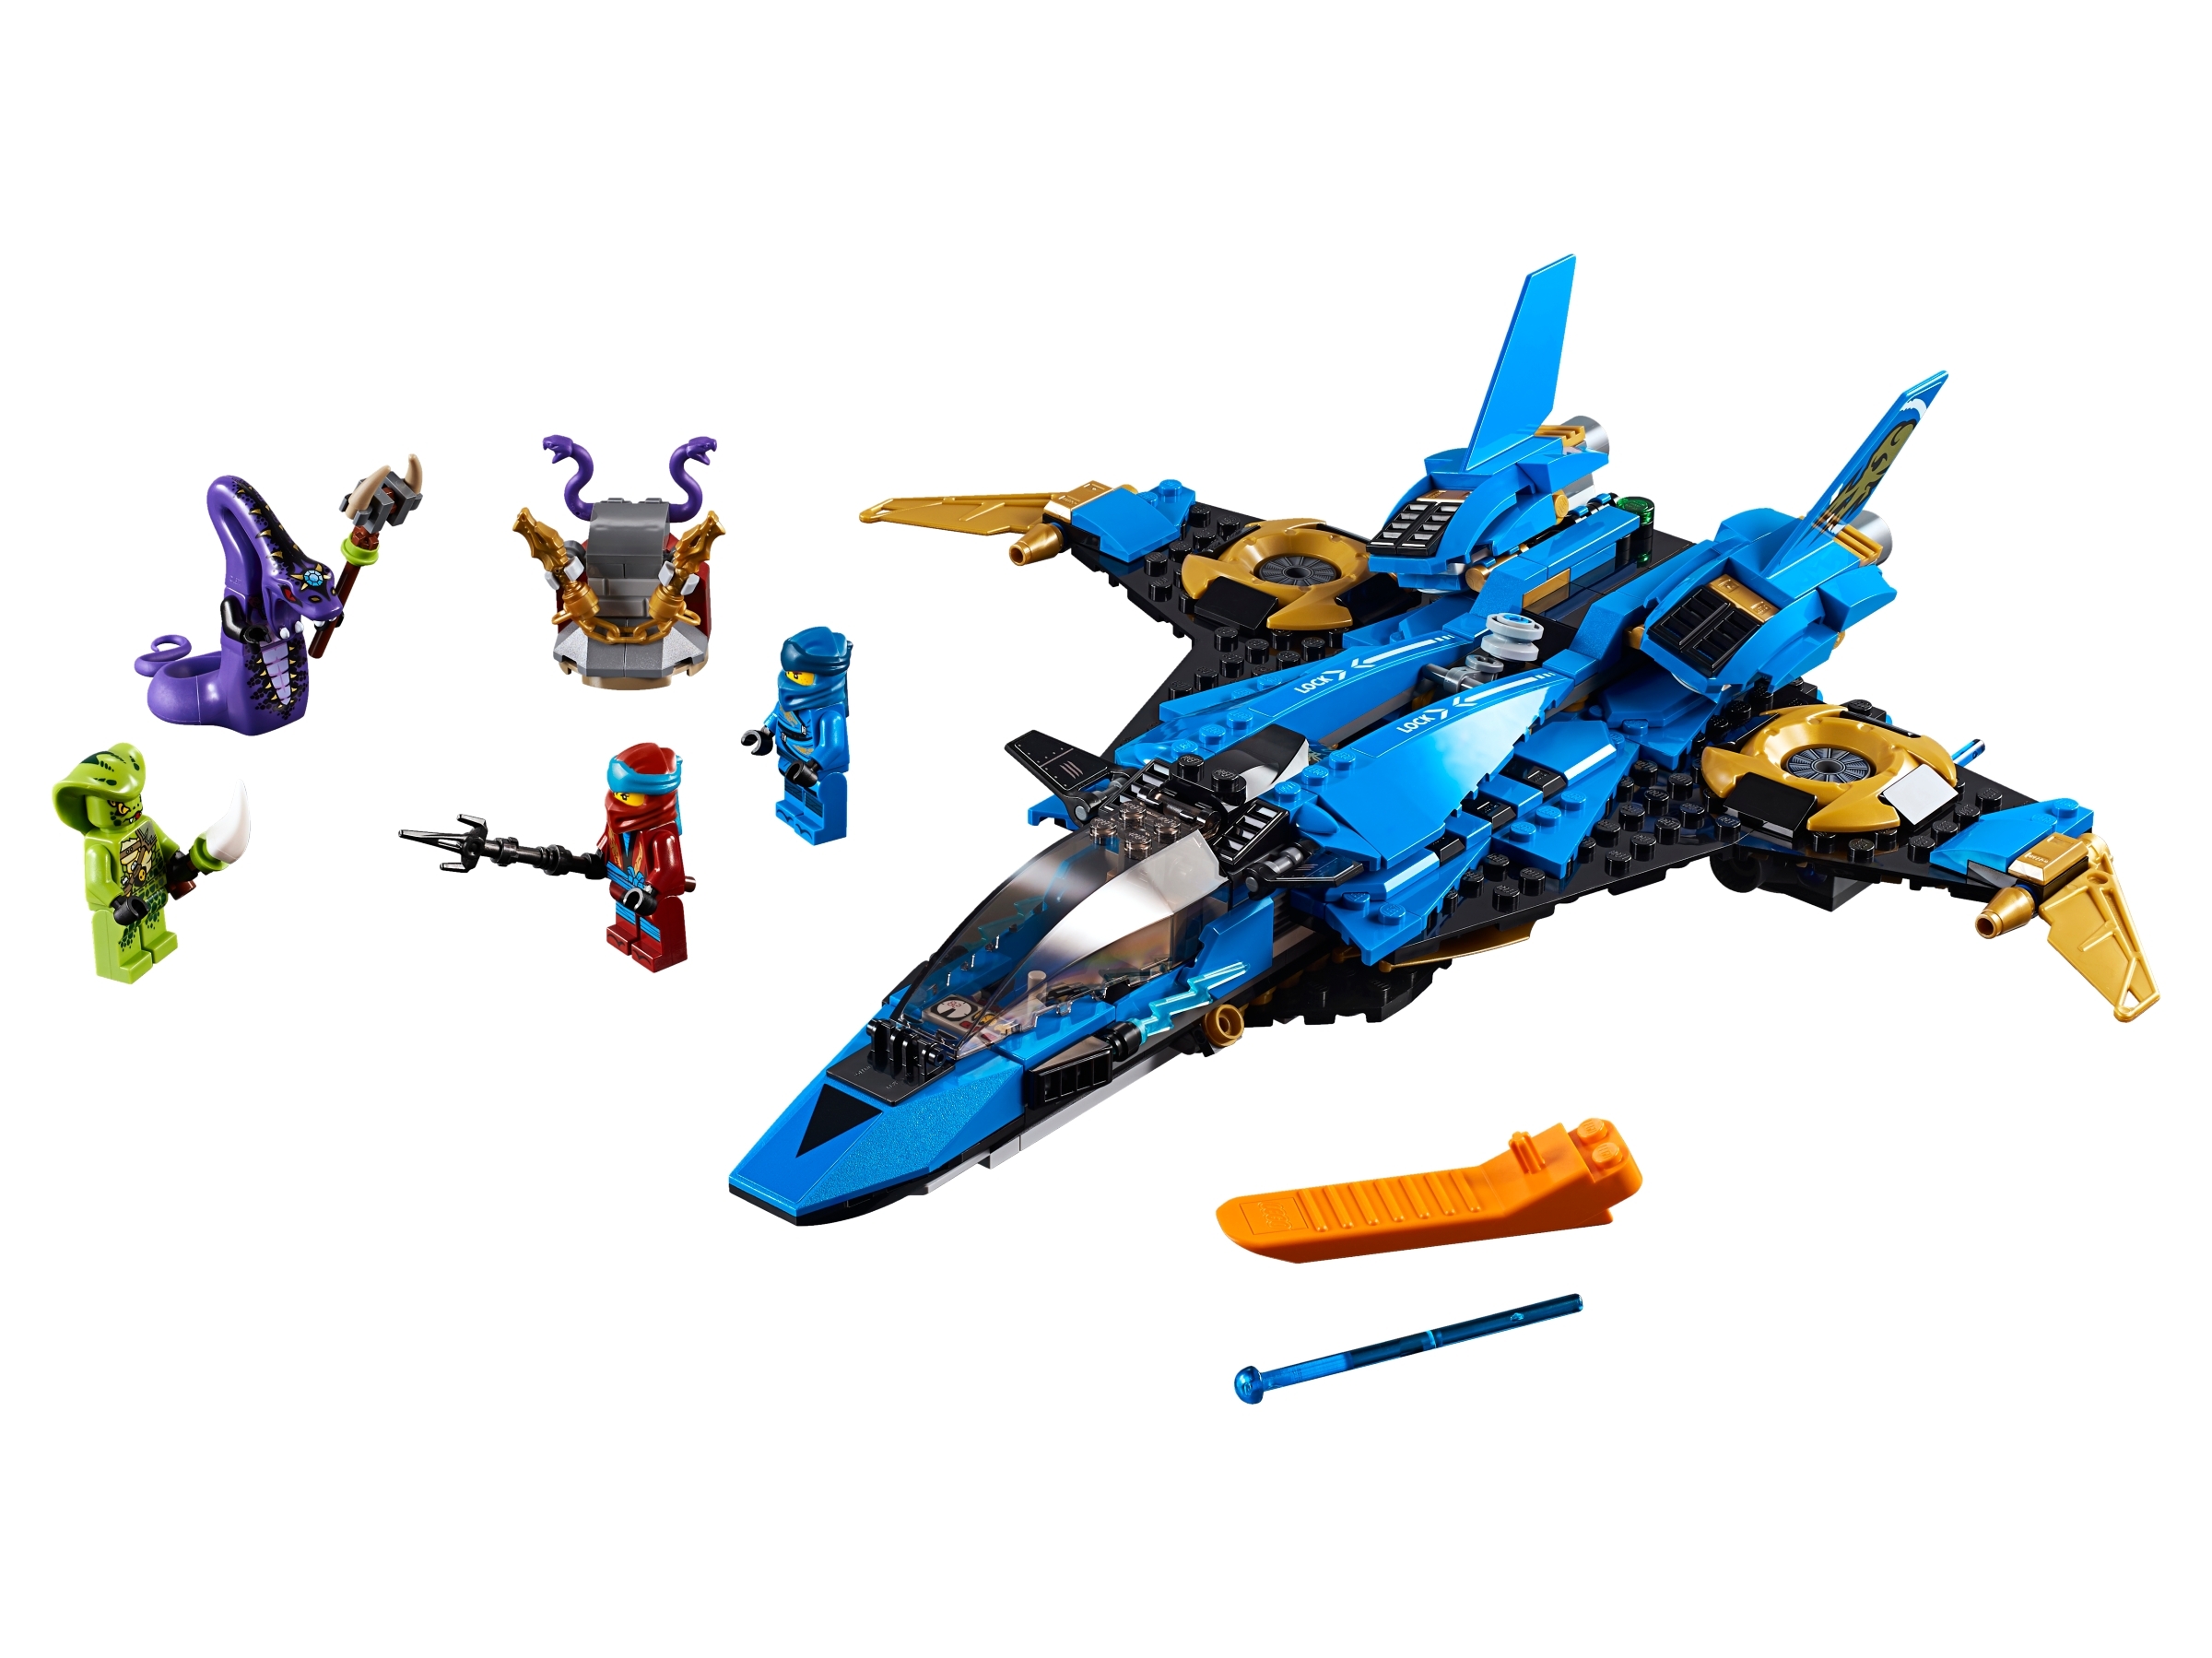 70668490 PiecesAges 9+ Lego Ninjago Jay's Storm Fighter